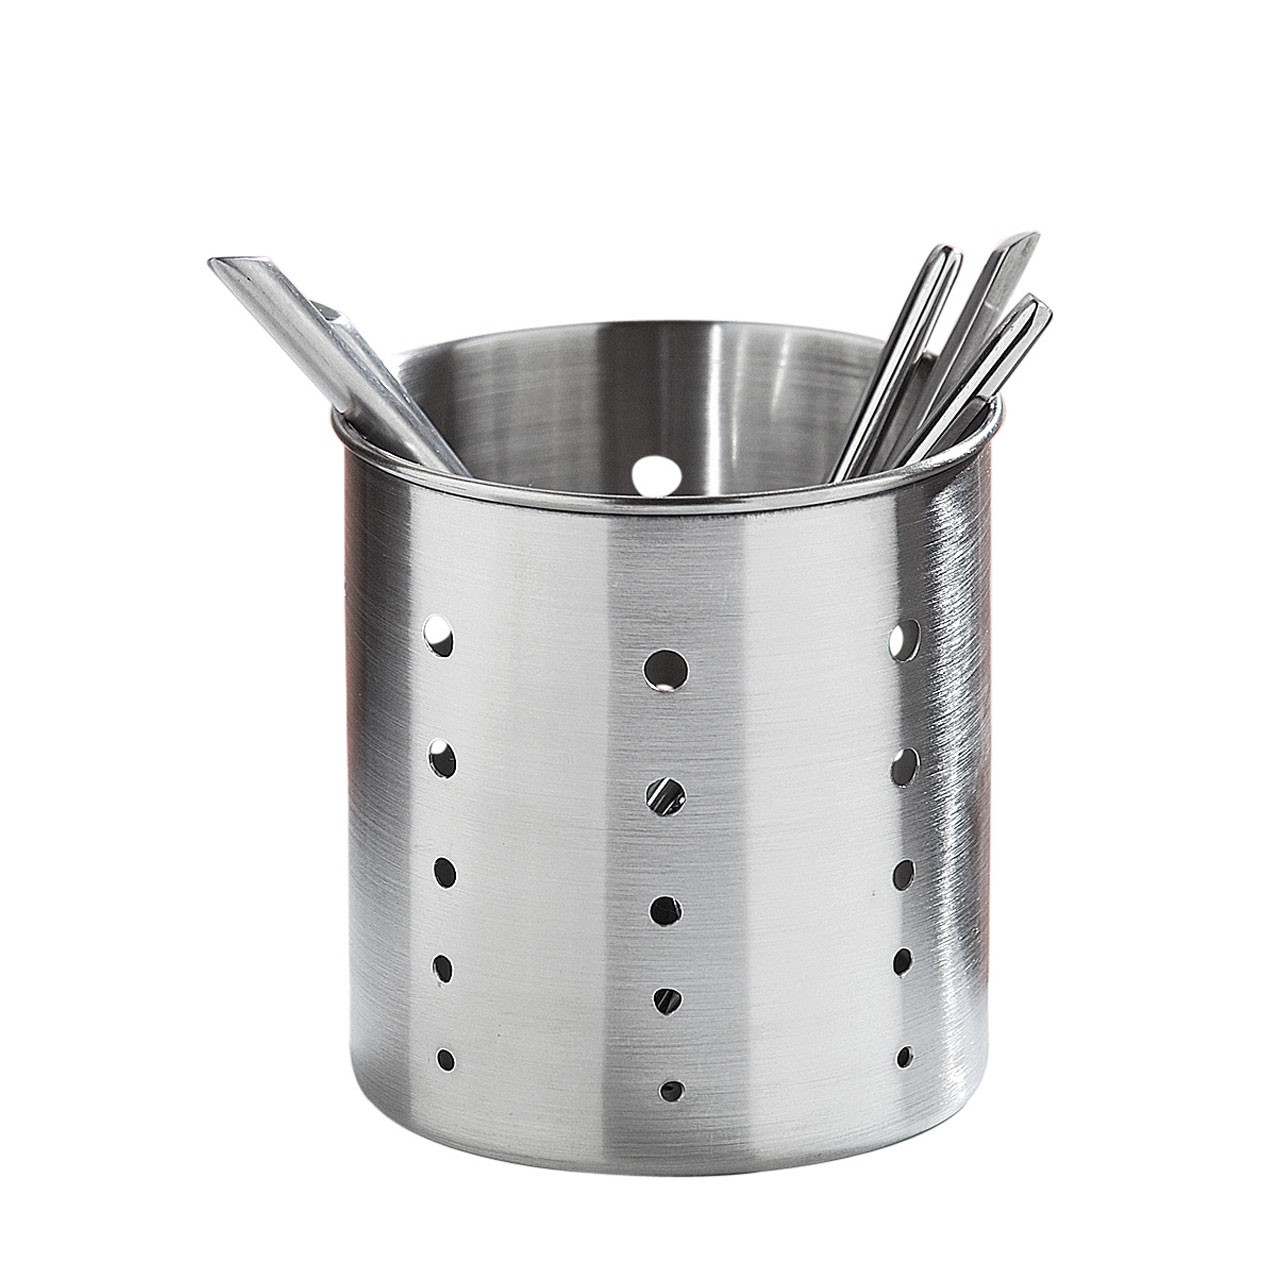 Prime Furnishing Cutlery Caddy, Satin Stainless Steel